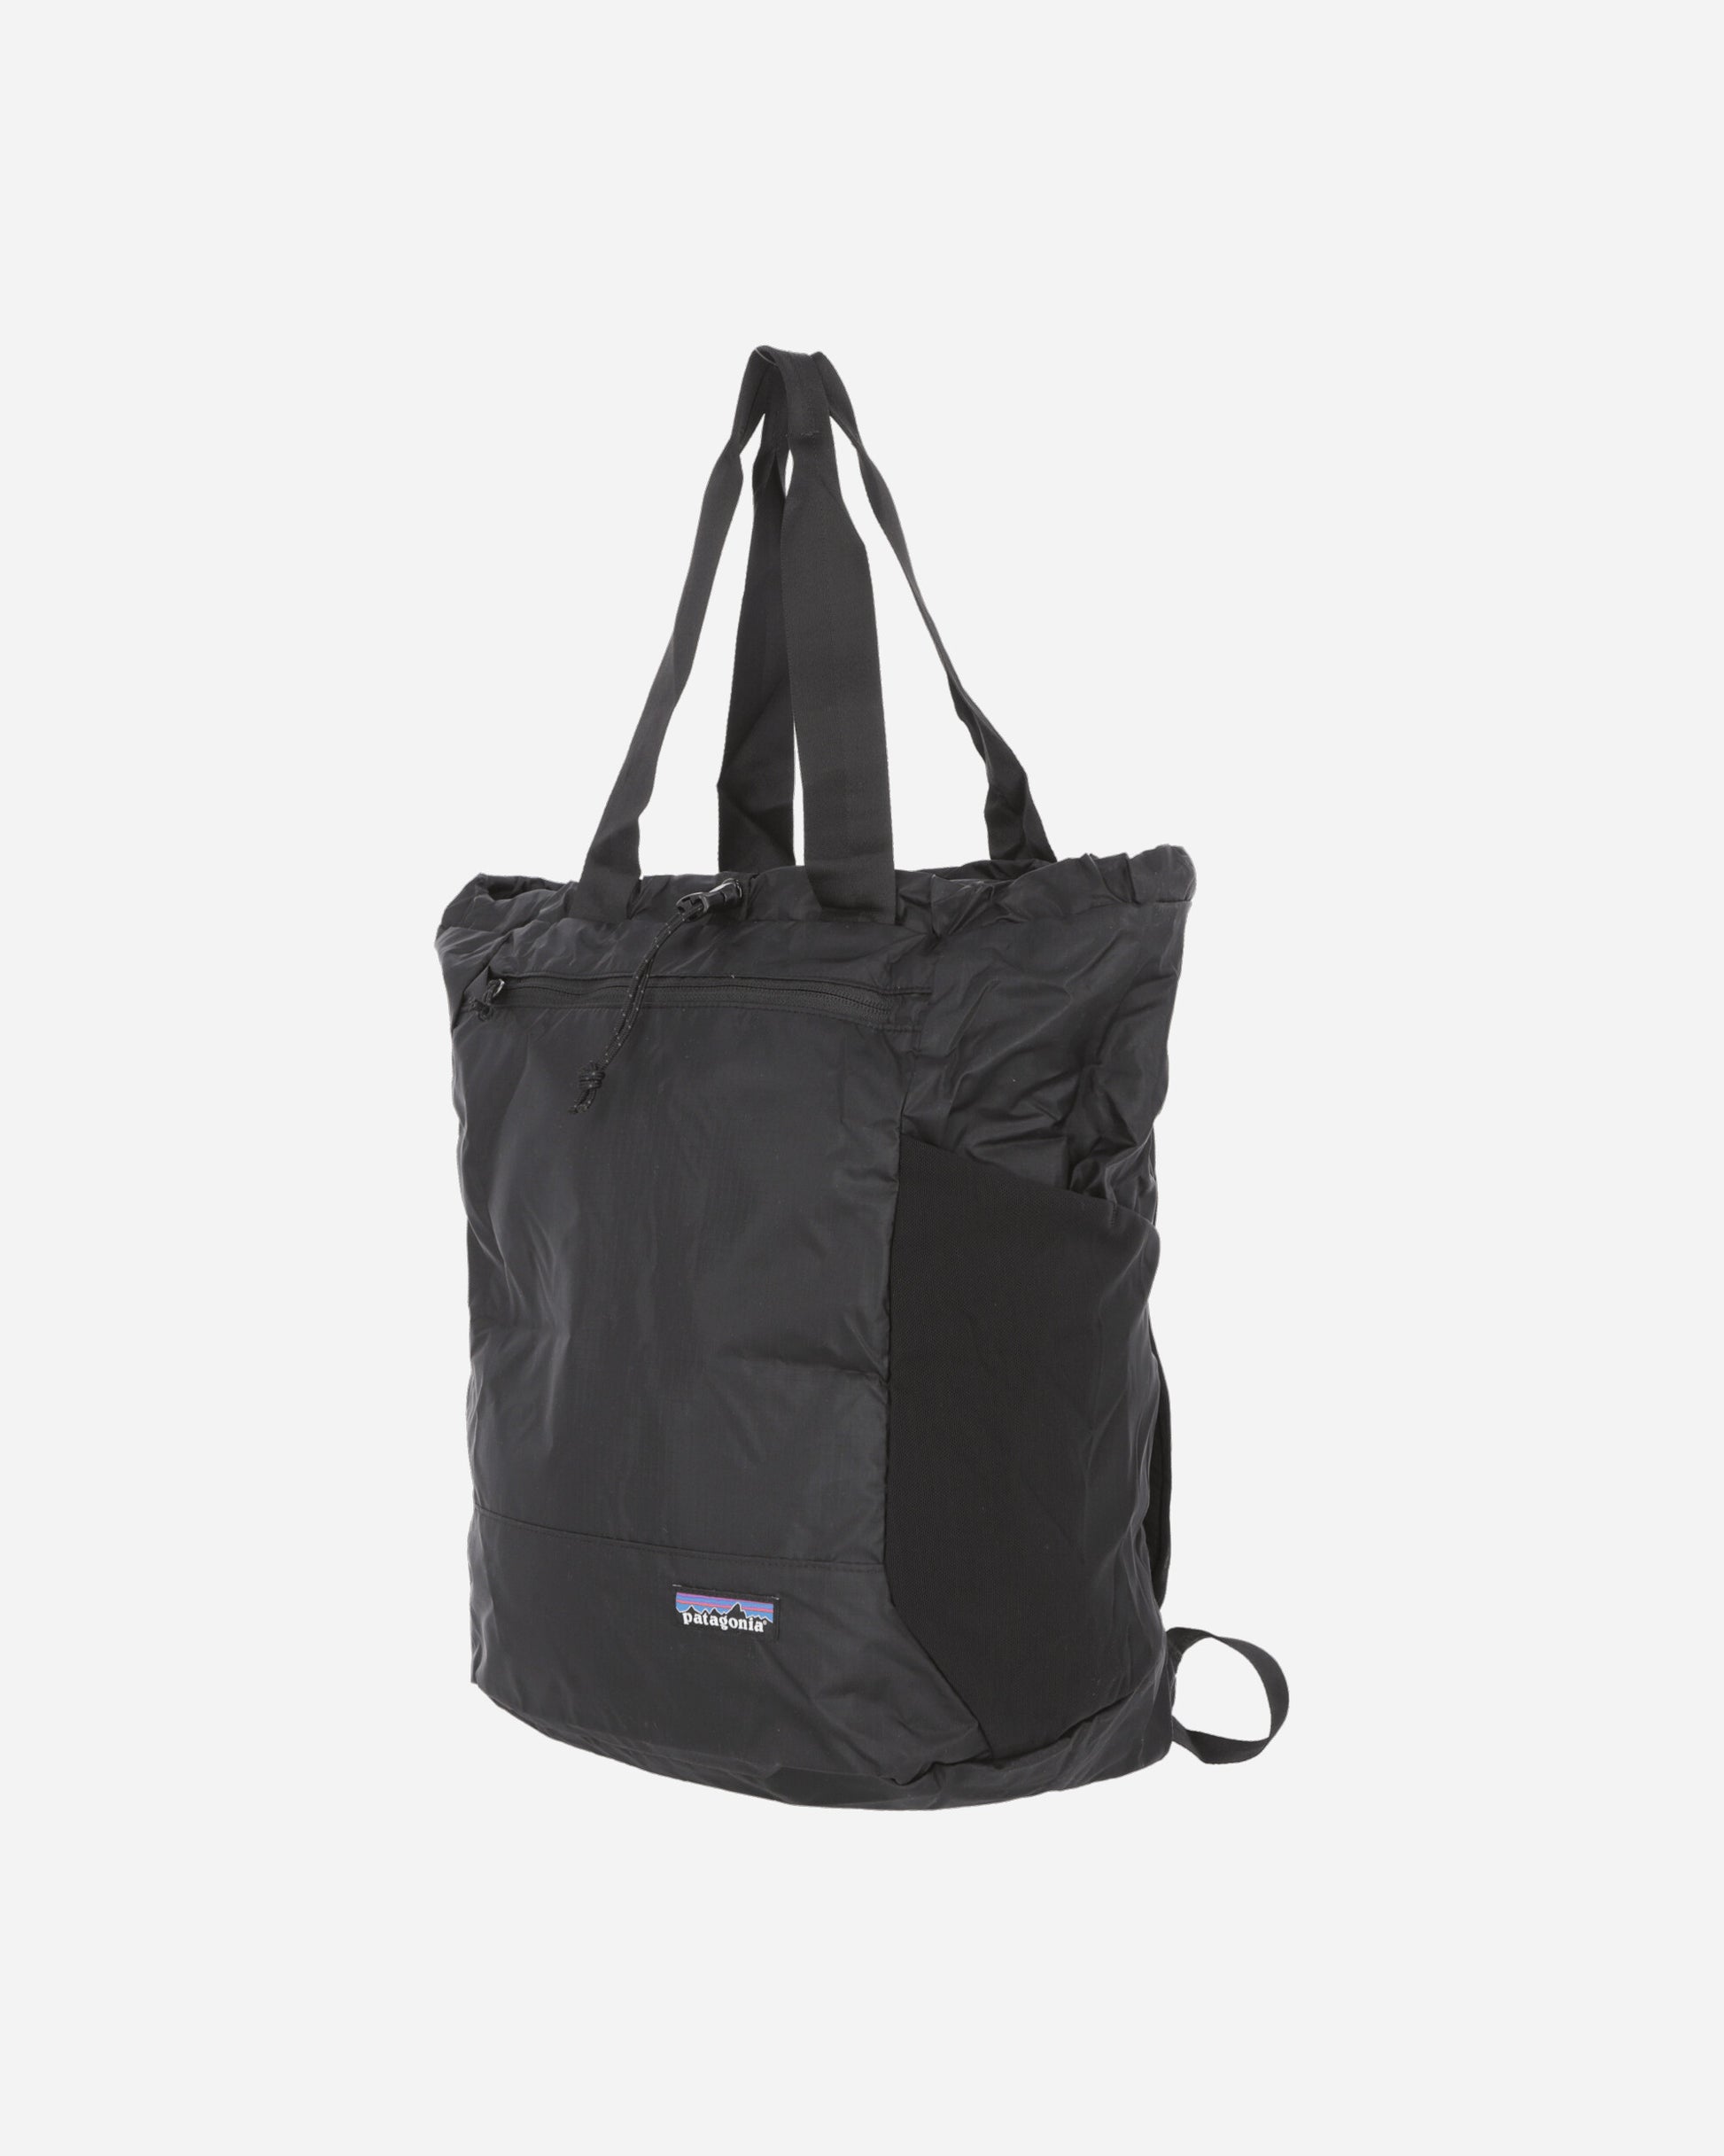 Patagonia Ultralight Black Hole Tote Pack Black Bags and Backpacks Tote Bags 48809 BLK